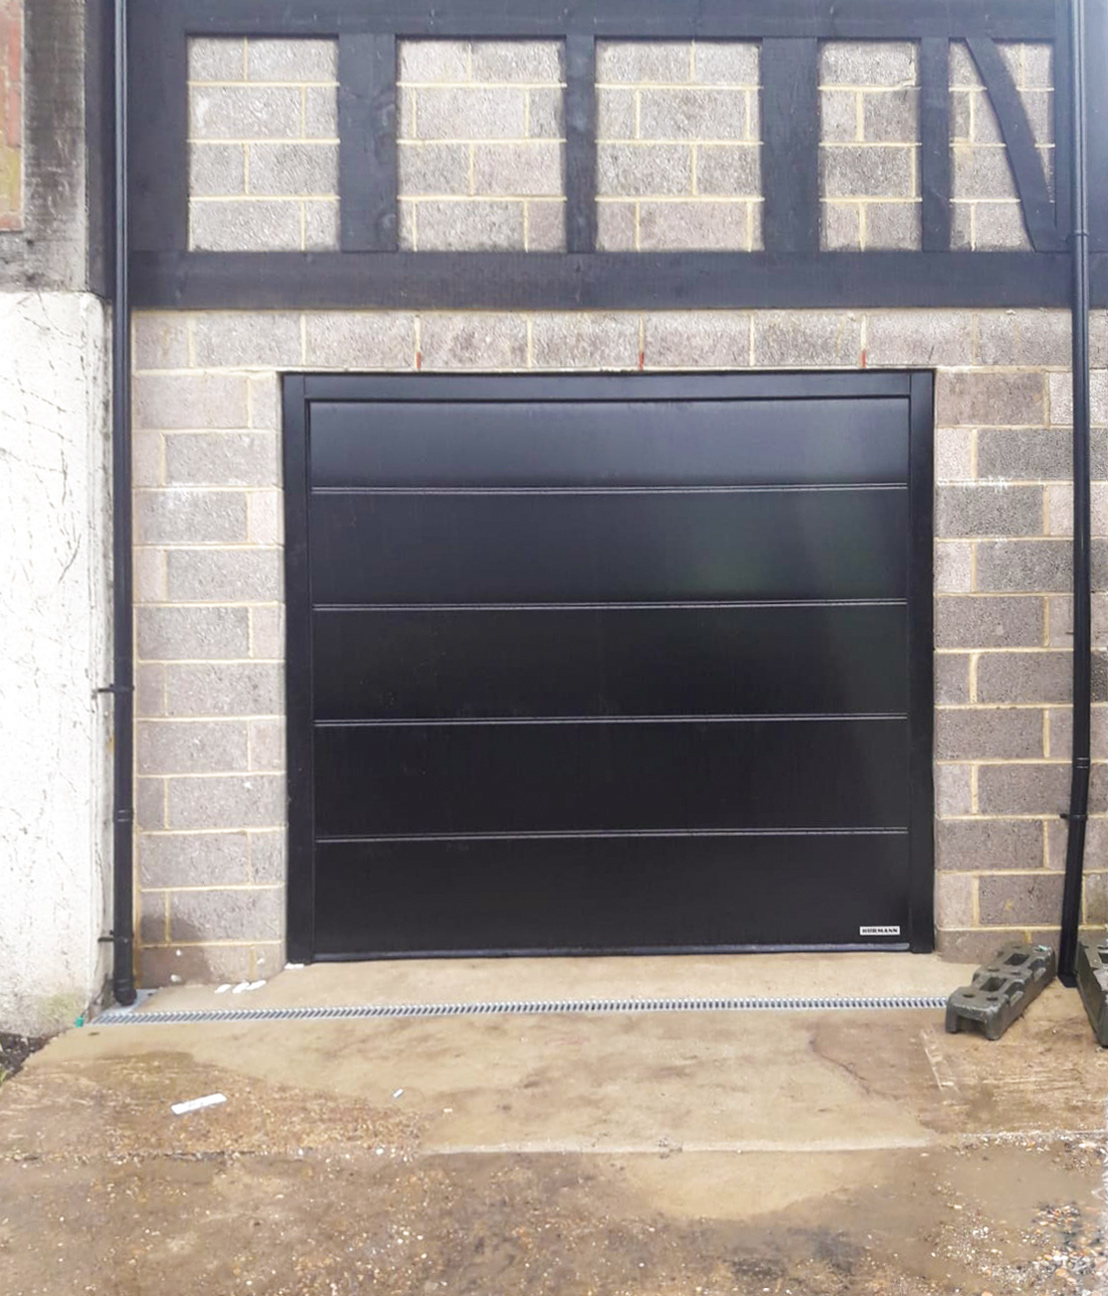 A Hormann LPU42 L-Ribbed Automated Sectional Garage Door finished in Black